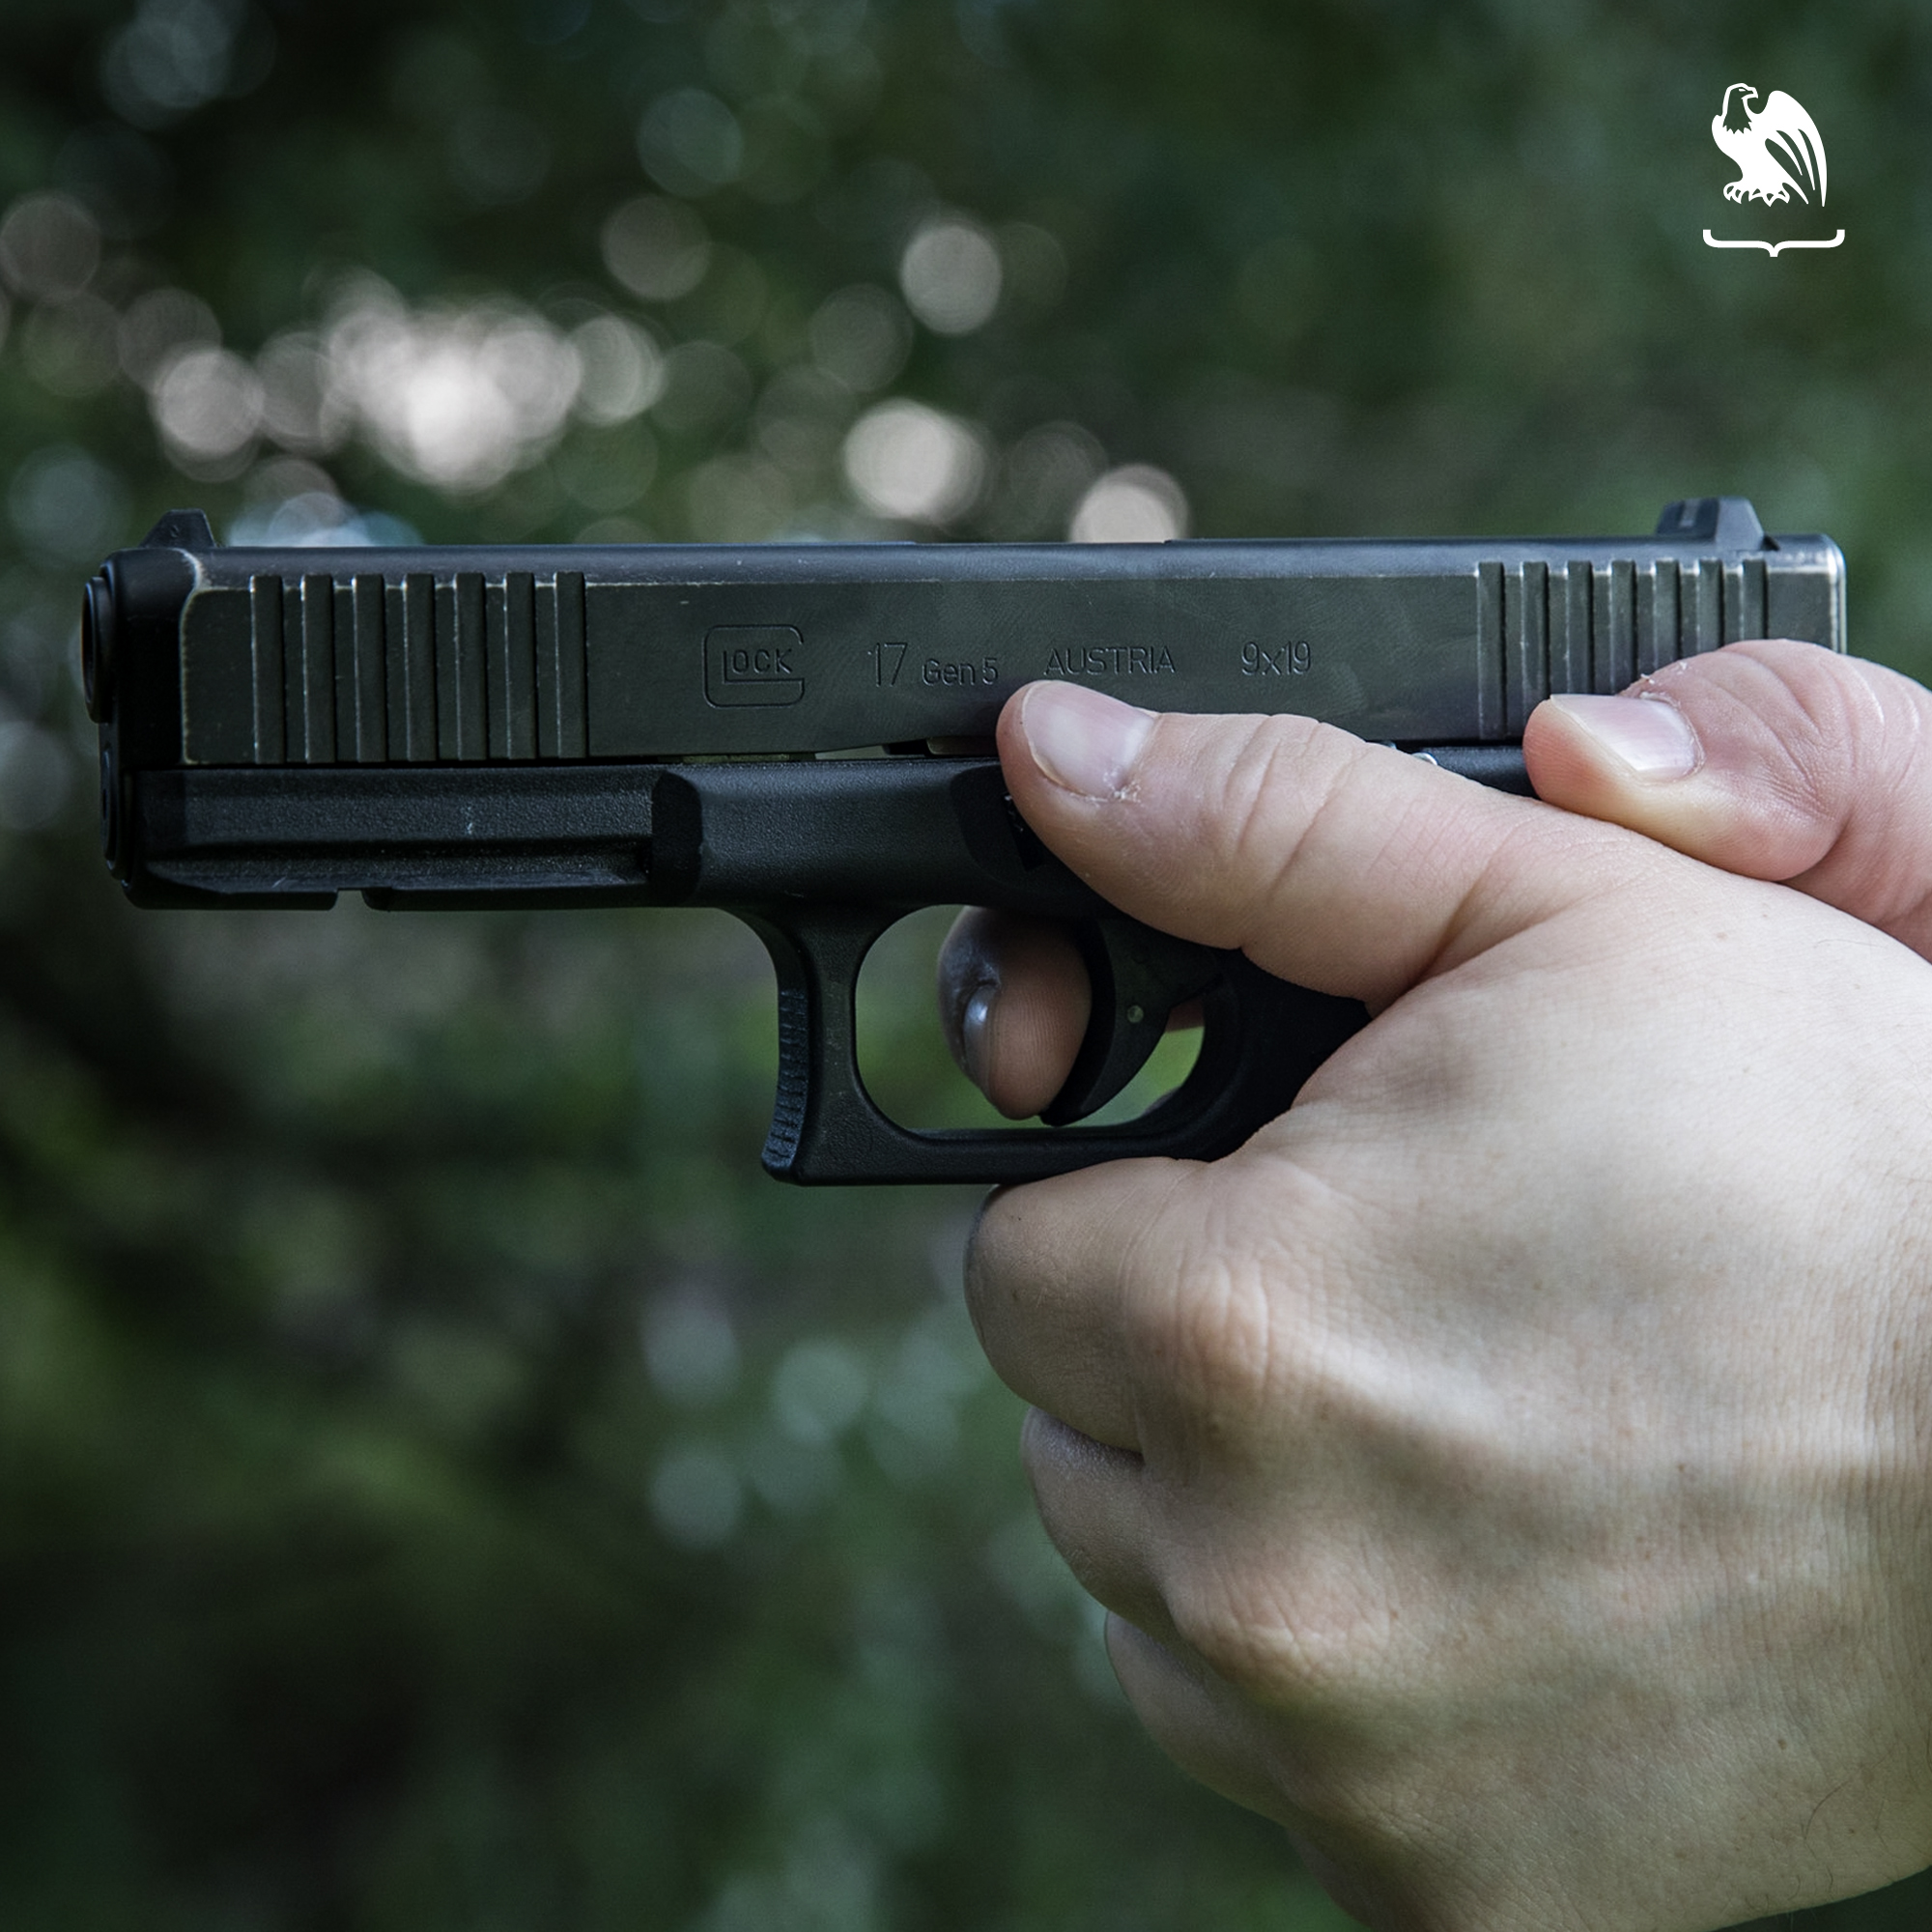 Trigger Reset - Generic Image of Handgun being hold in a shooting position